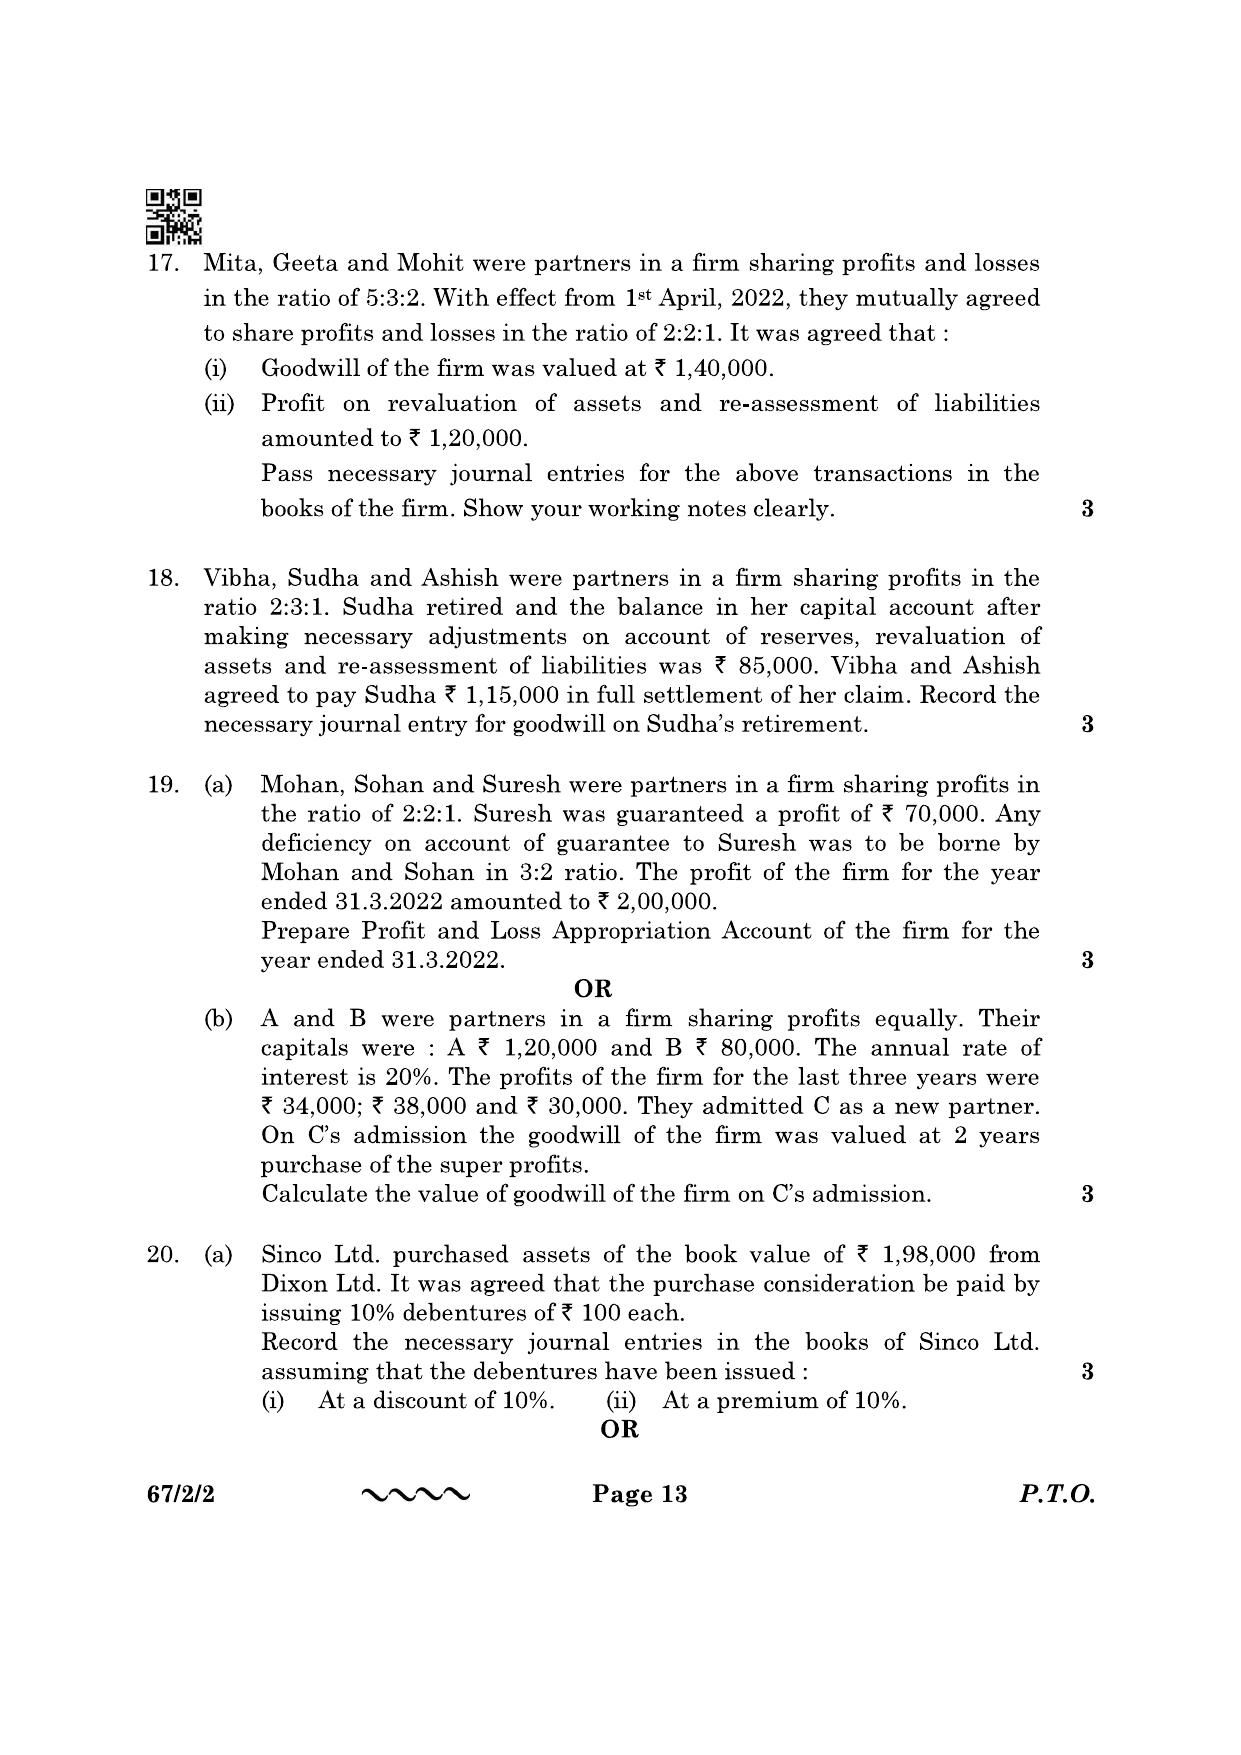 CBSE Class 12 67-2-2 Accountancy 2023 Question Paper - Page 13